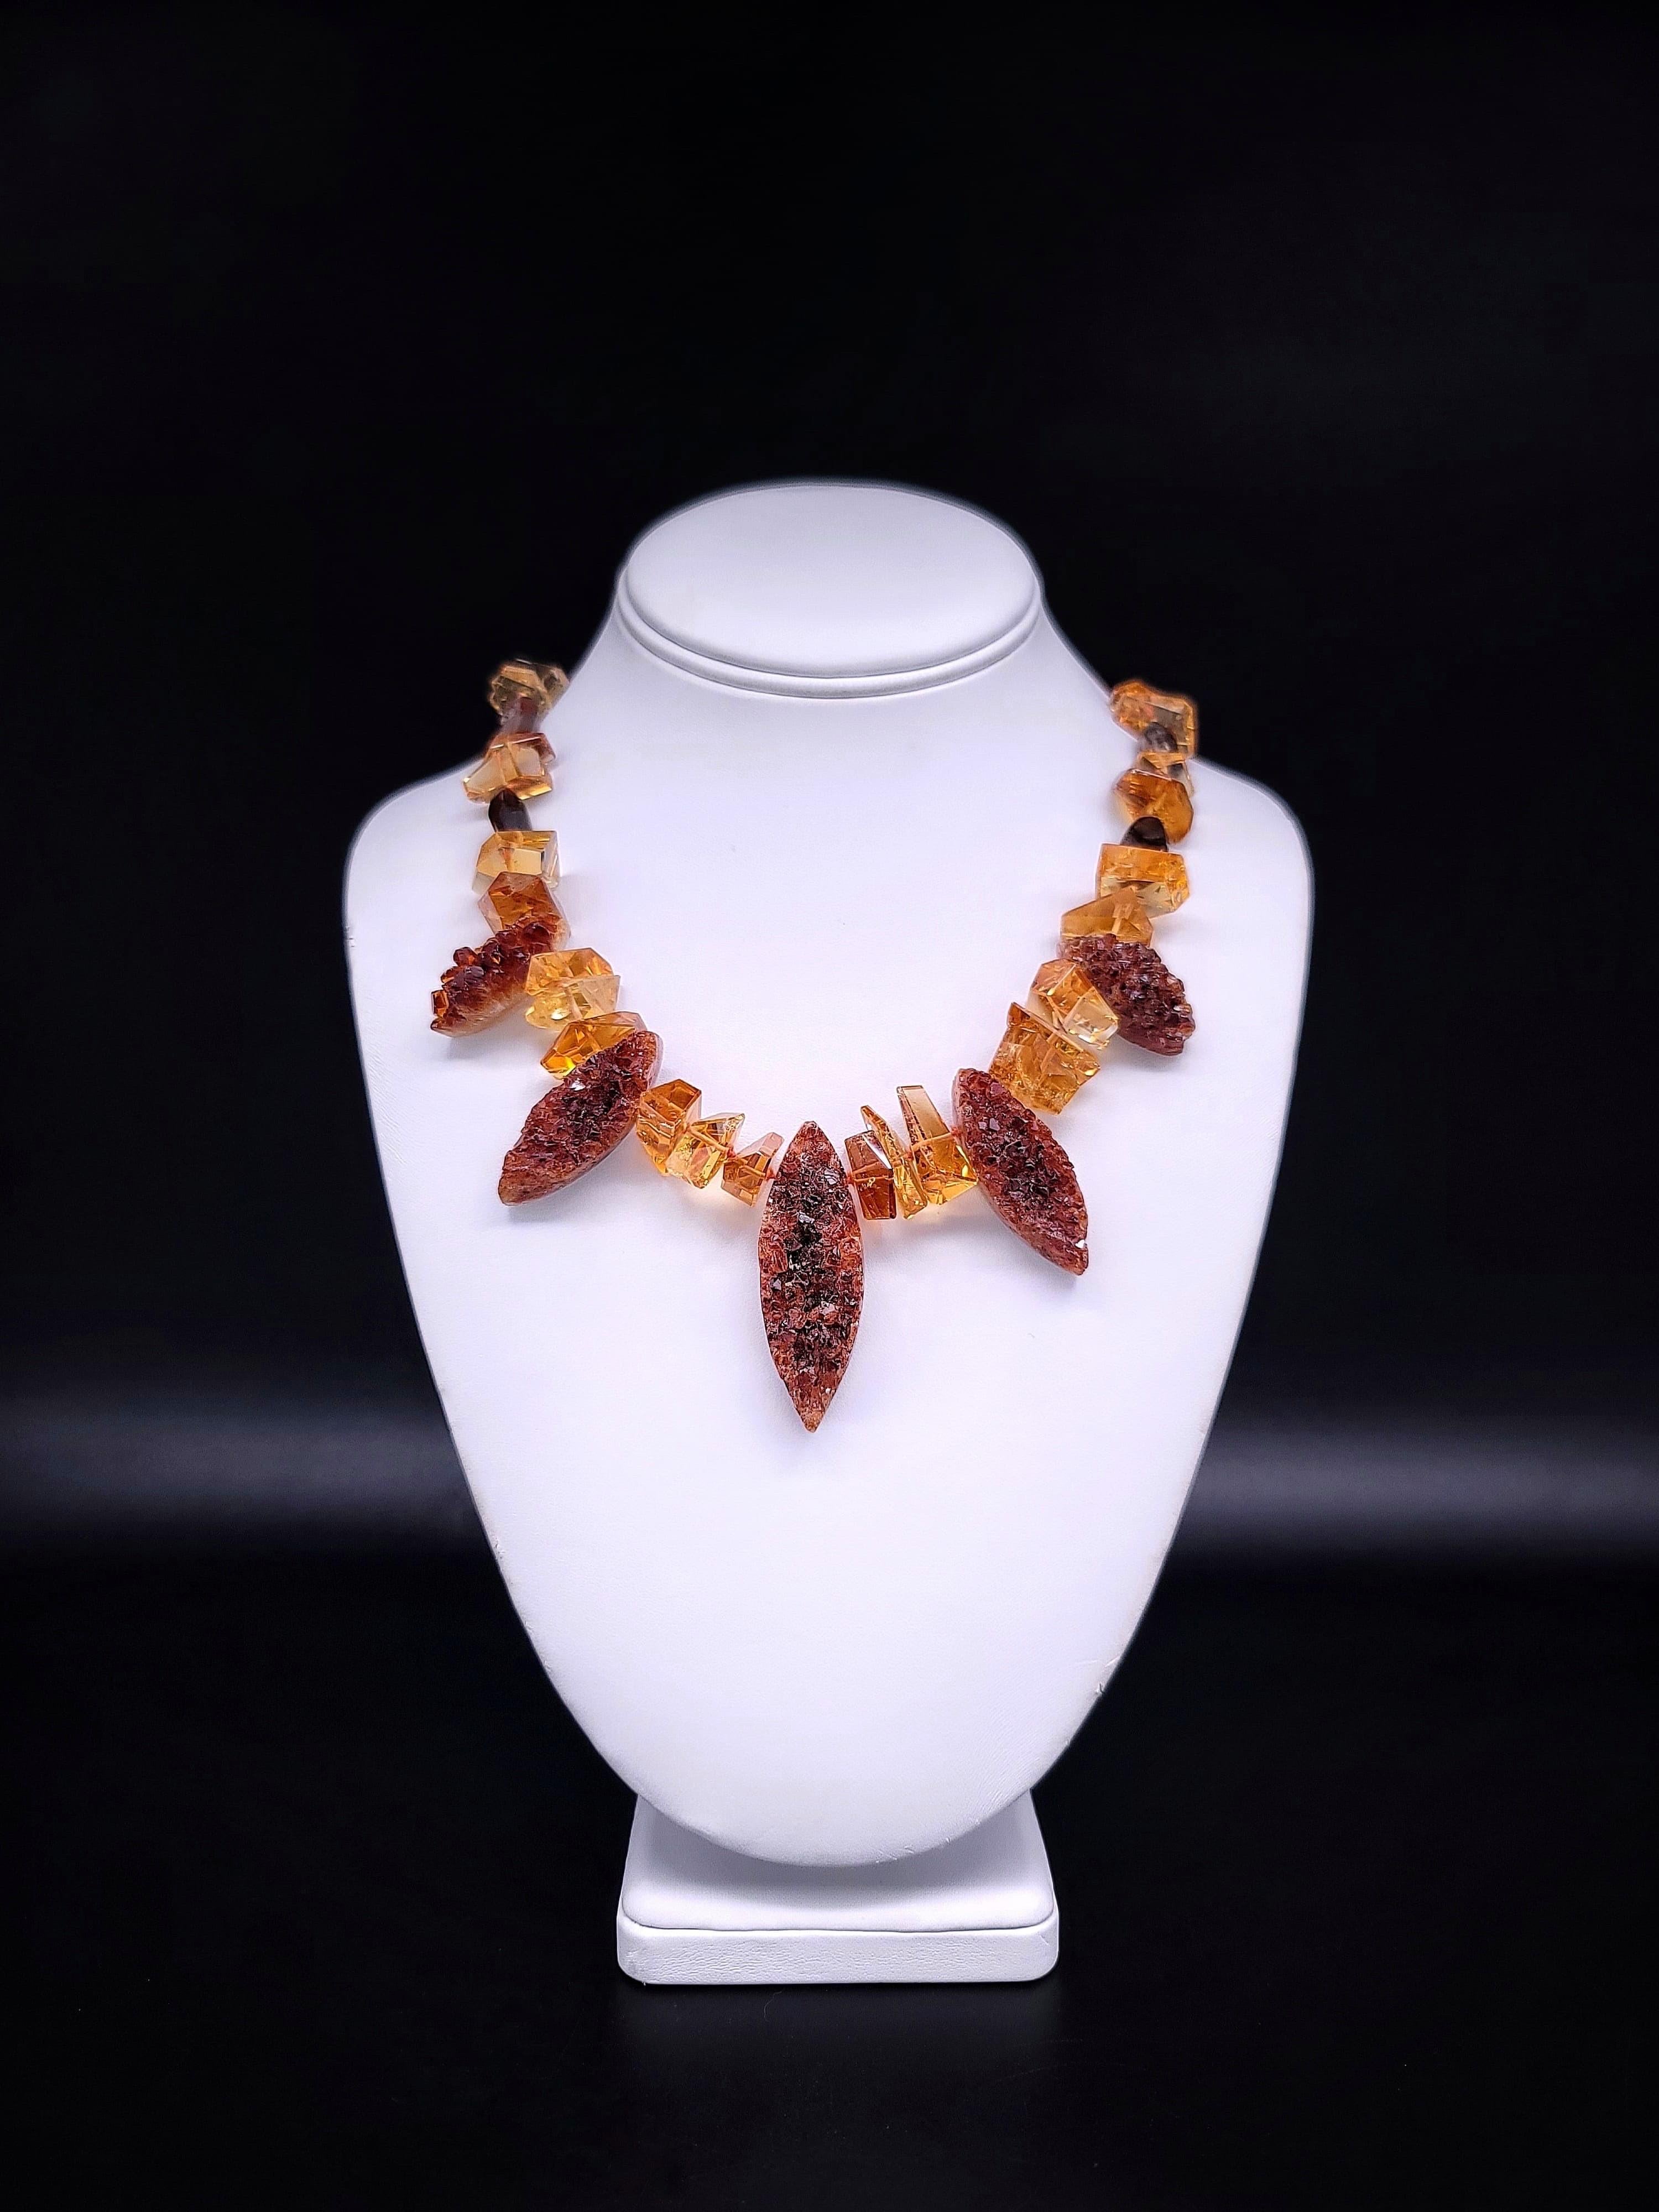 One-of-a-Kind
Rich golden polished and cut citrines mixed with Topaz brown geodes with polished backs and heavily granulated arrowheads. 
Spaced with Topaz polished bean-shaped beads. A vermeil (22 karat gold over Sterling Silver) box clasp with a